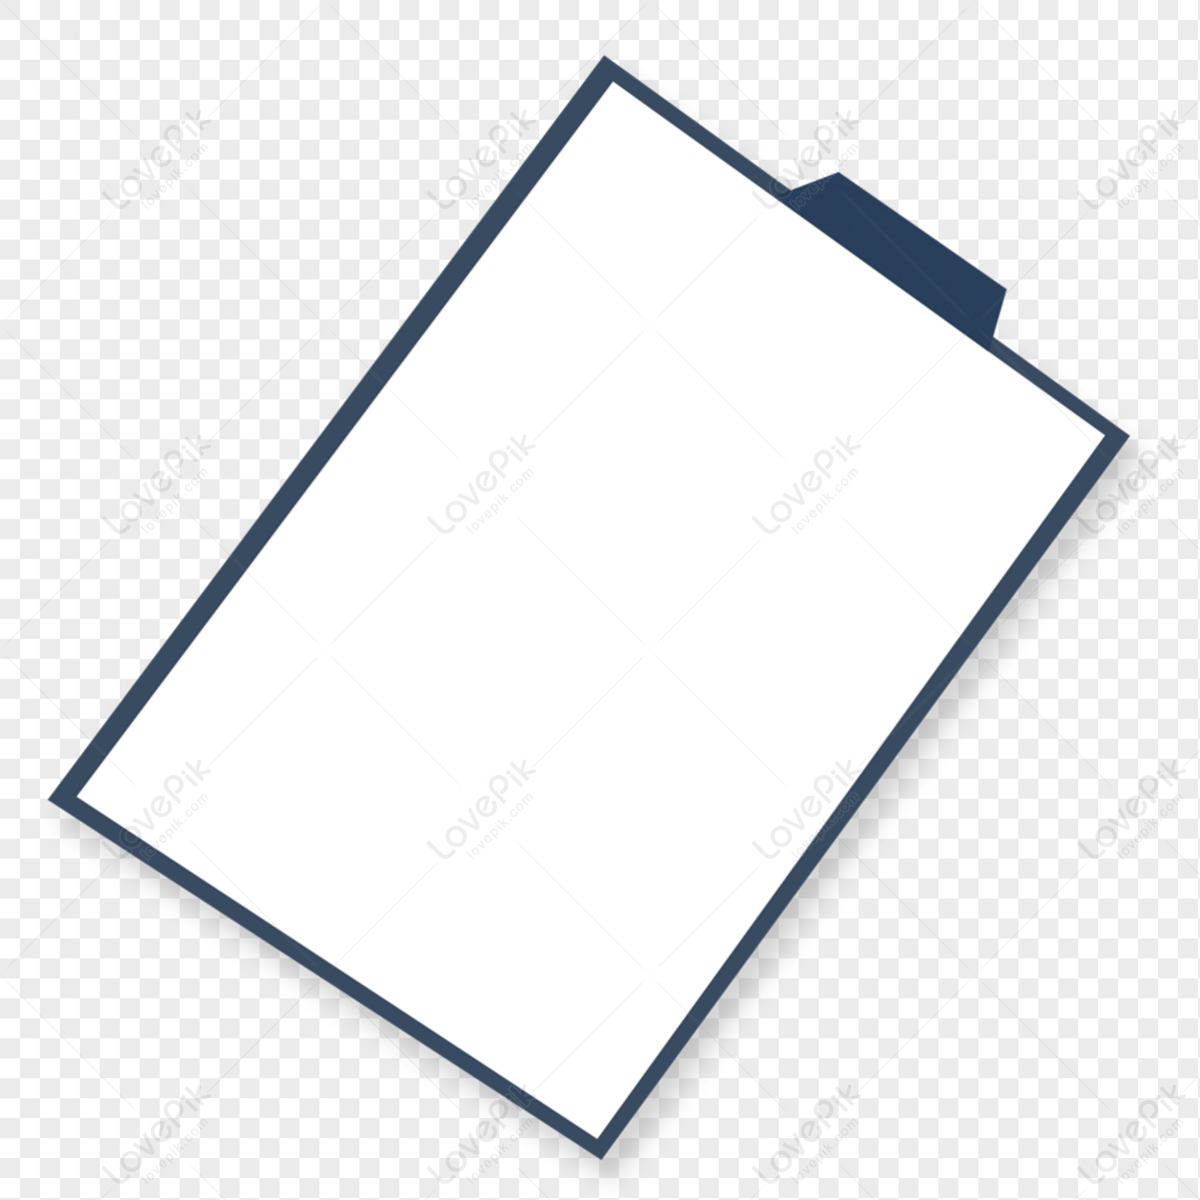 Folder Icons PNG Transparent Background And Clipart Image For Free Download  - Lovepik | 400257140